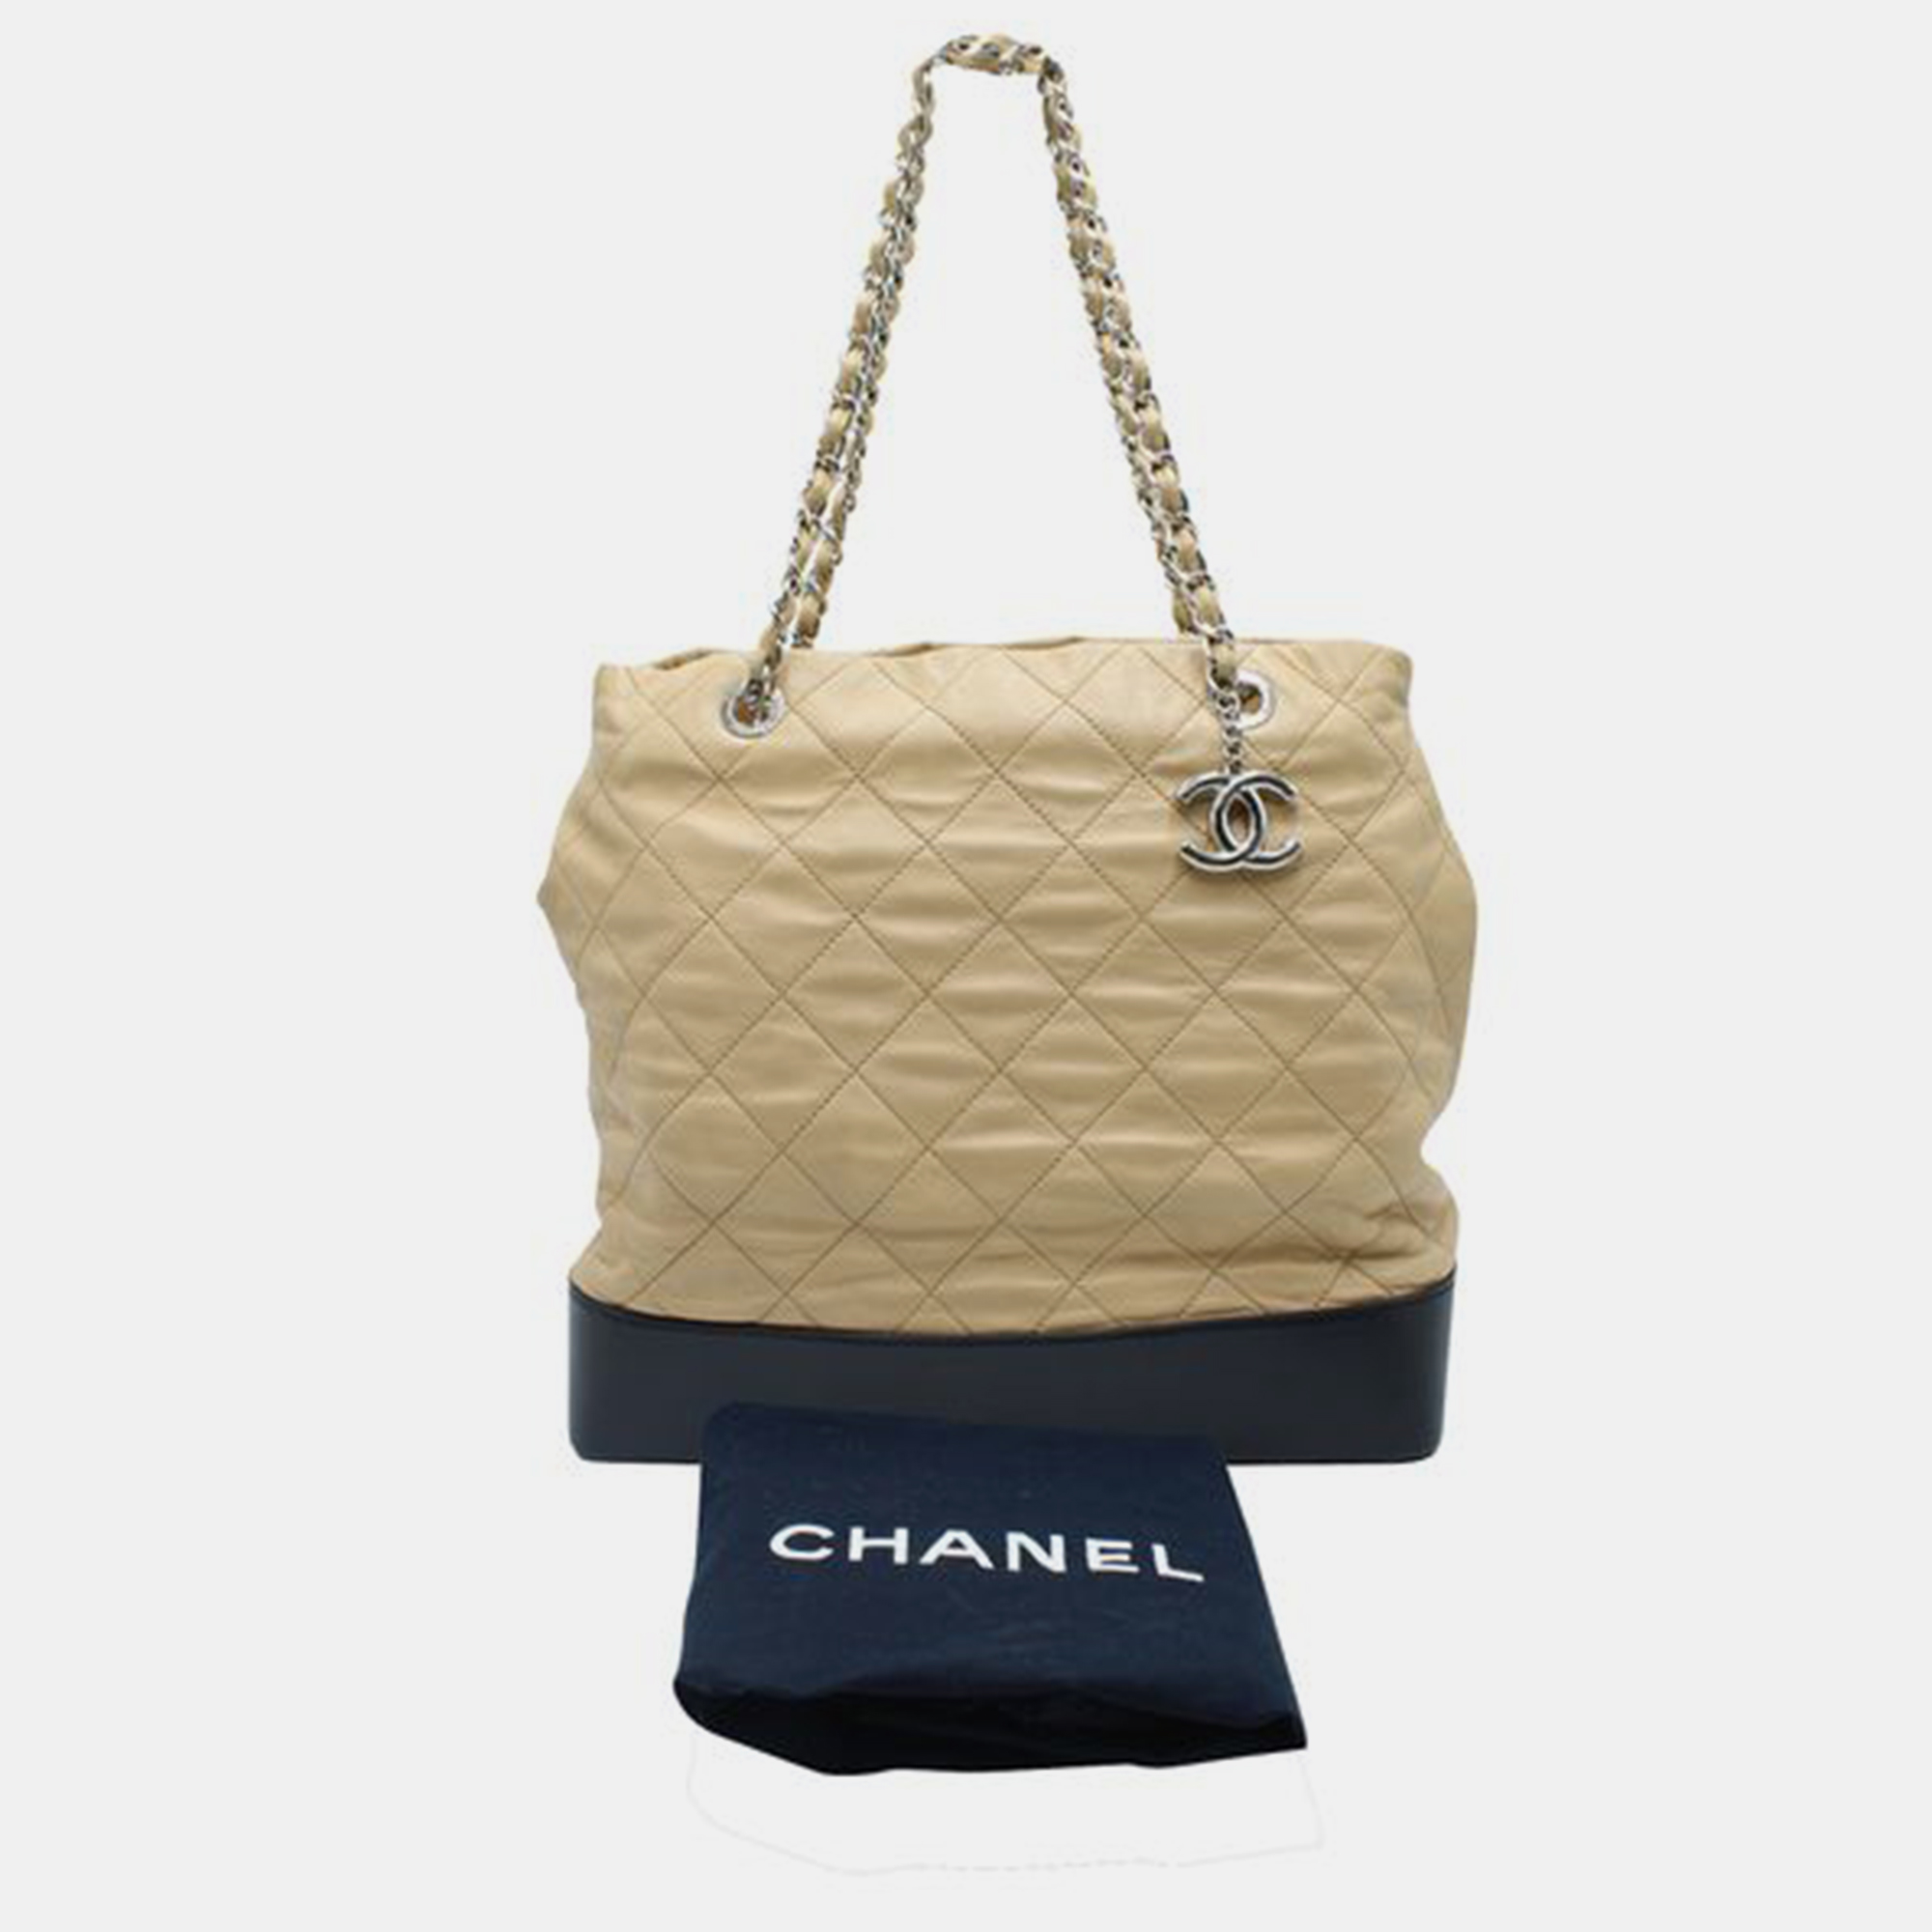 CHANEL Light Brown And Black Quilted Tote Bag In Silver Hardware TOTE BAGS